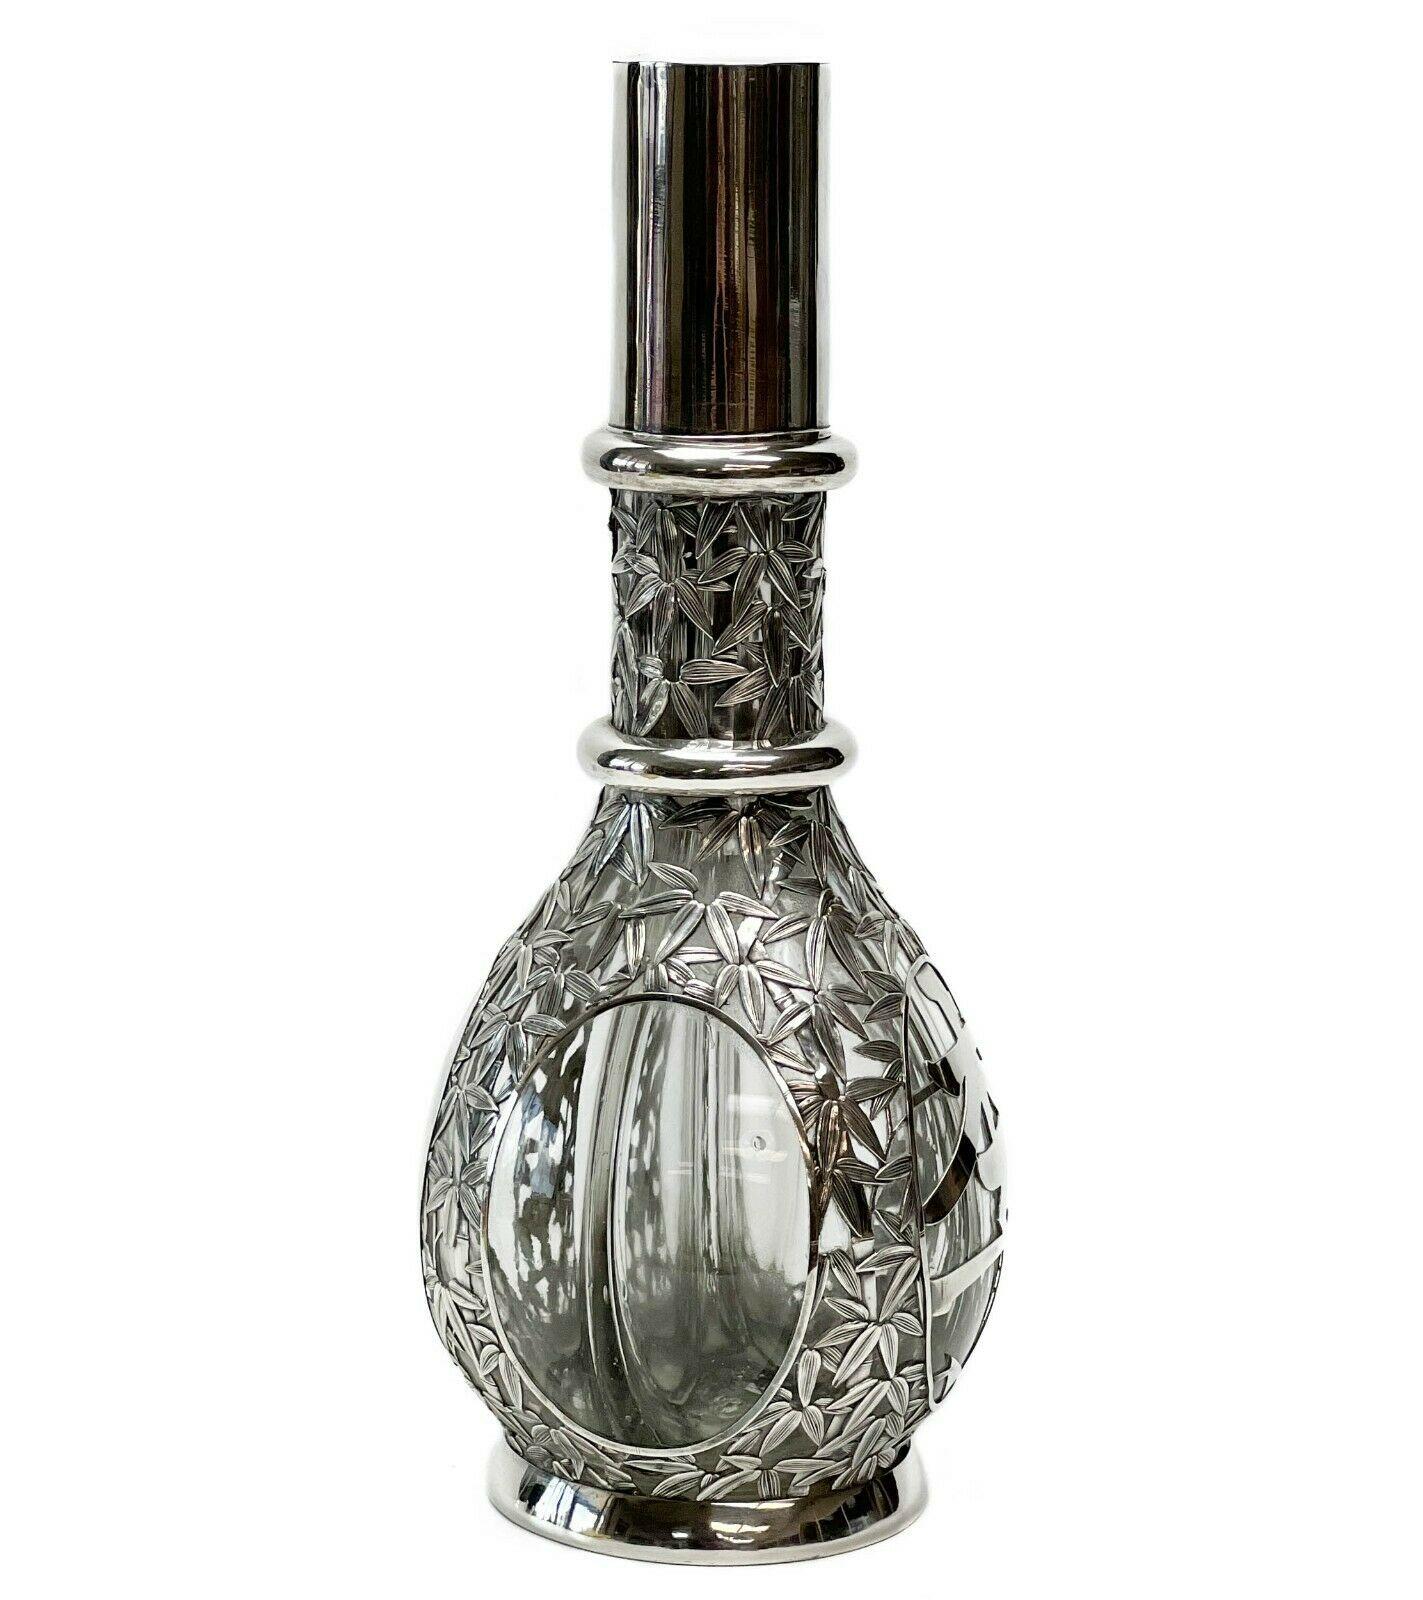 Japanese 950 silver overlay glass 4 chamber decanter bamboo design

Decanter separated into 4 chambers, each with silver capped cork. Silver overlay bamboo design to exterior with four circular panels, one panel overlaid with a Japanese character.